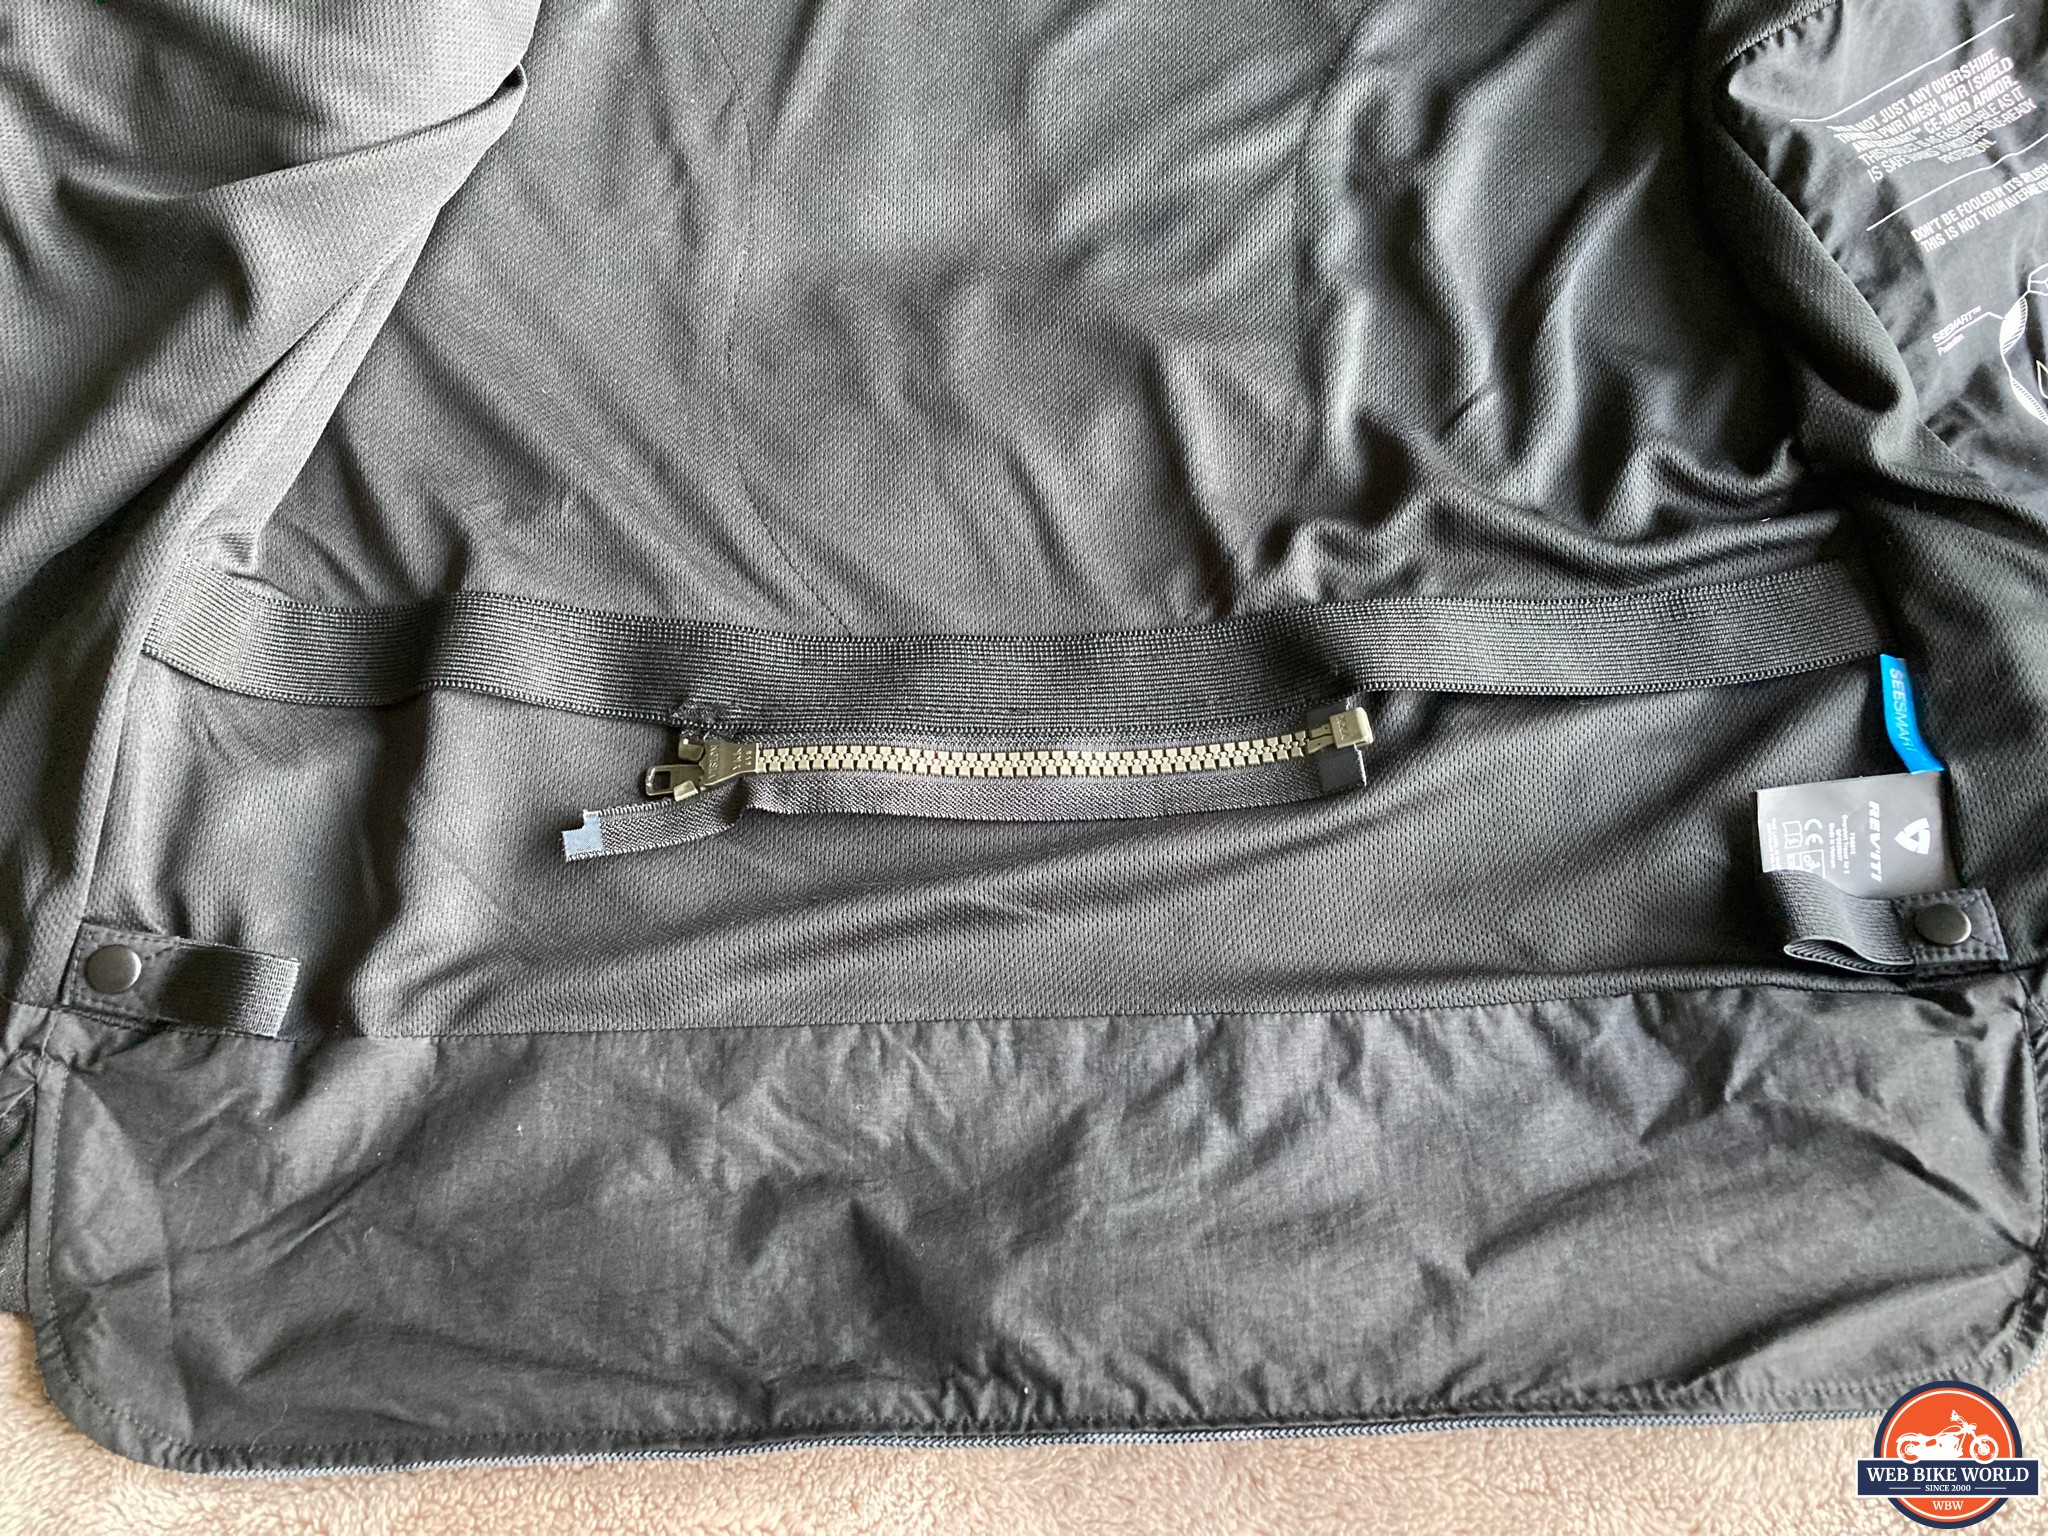 REV’IT! Tracer Air 2 Overshirt Hands-On Review - webBikeWorld